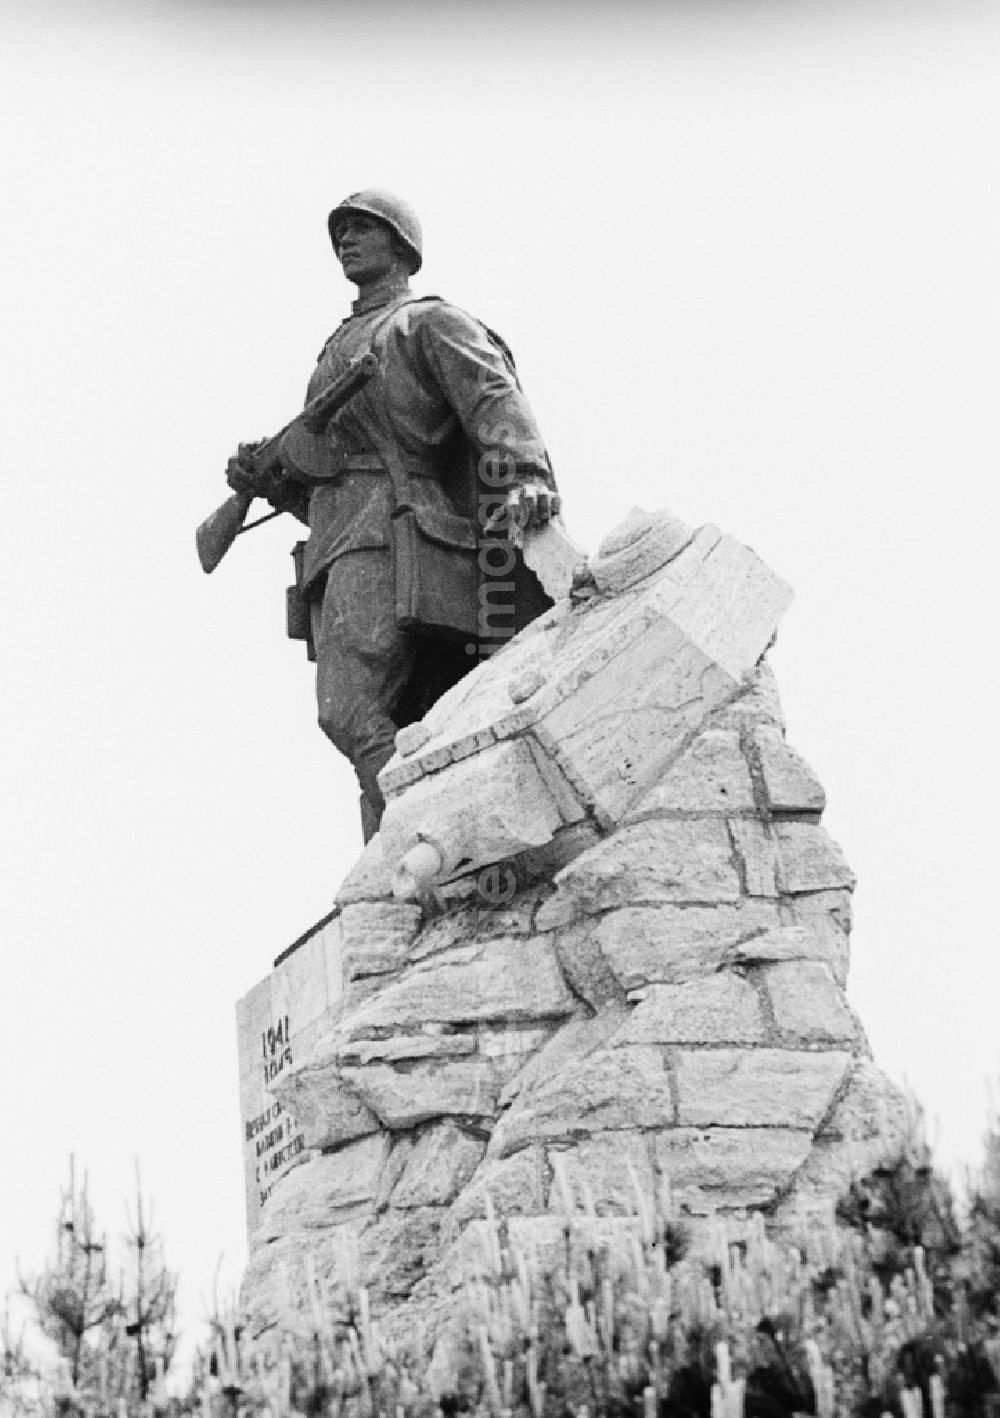 GDR picture archive: Seelow - Monument to the fallen russian soldiers by Lew Kerbel, at the Memorial Seelow Heights in Seelow, in the present state of Brandenburg. The bronze figure depicts a Red Army soldier with a submachine gun, standing next to the tower of a destroyed German tank